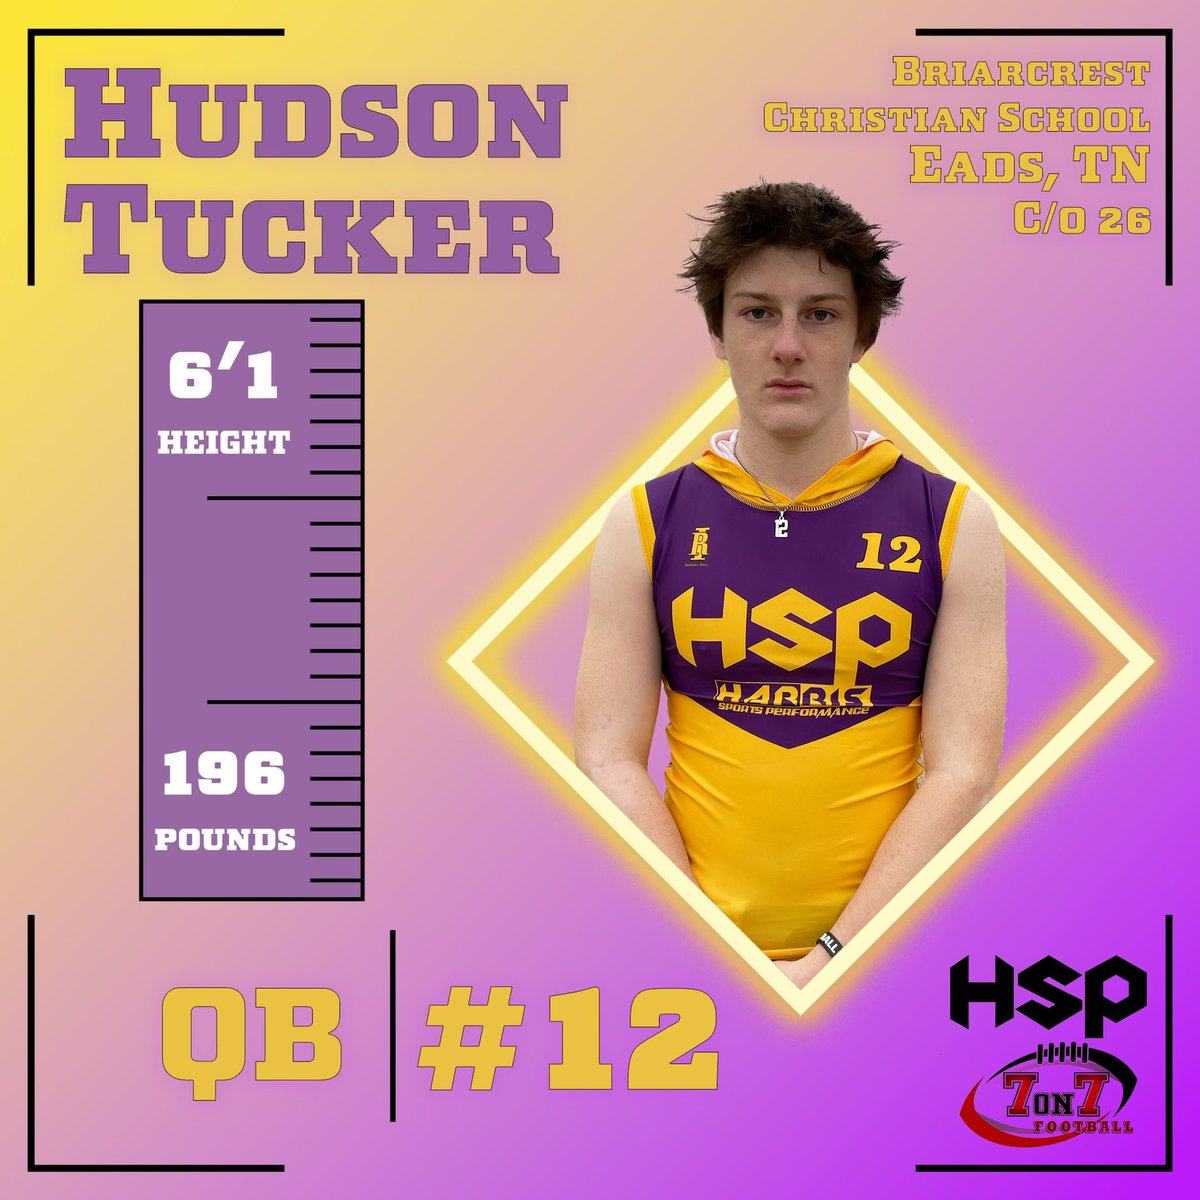 Coaches in the Memphis, Tennessee area recruiting QB’s stop by & see @HudsonTucker12 at Briarcrest Christian School. He’s a hidden gem 💎. #teamhsp7v7